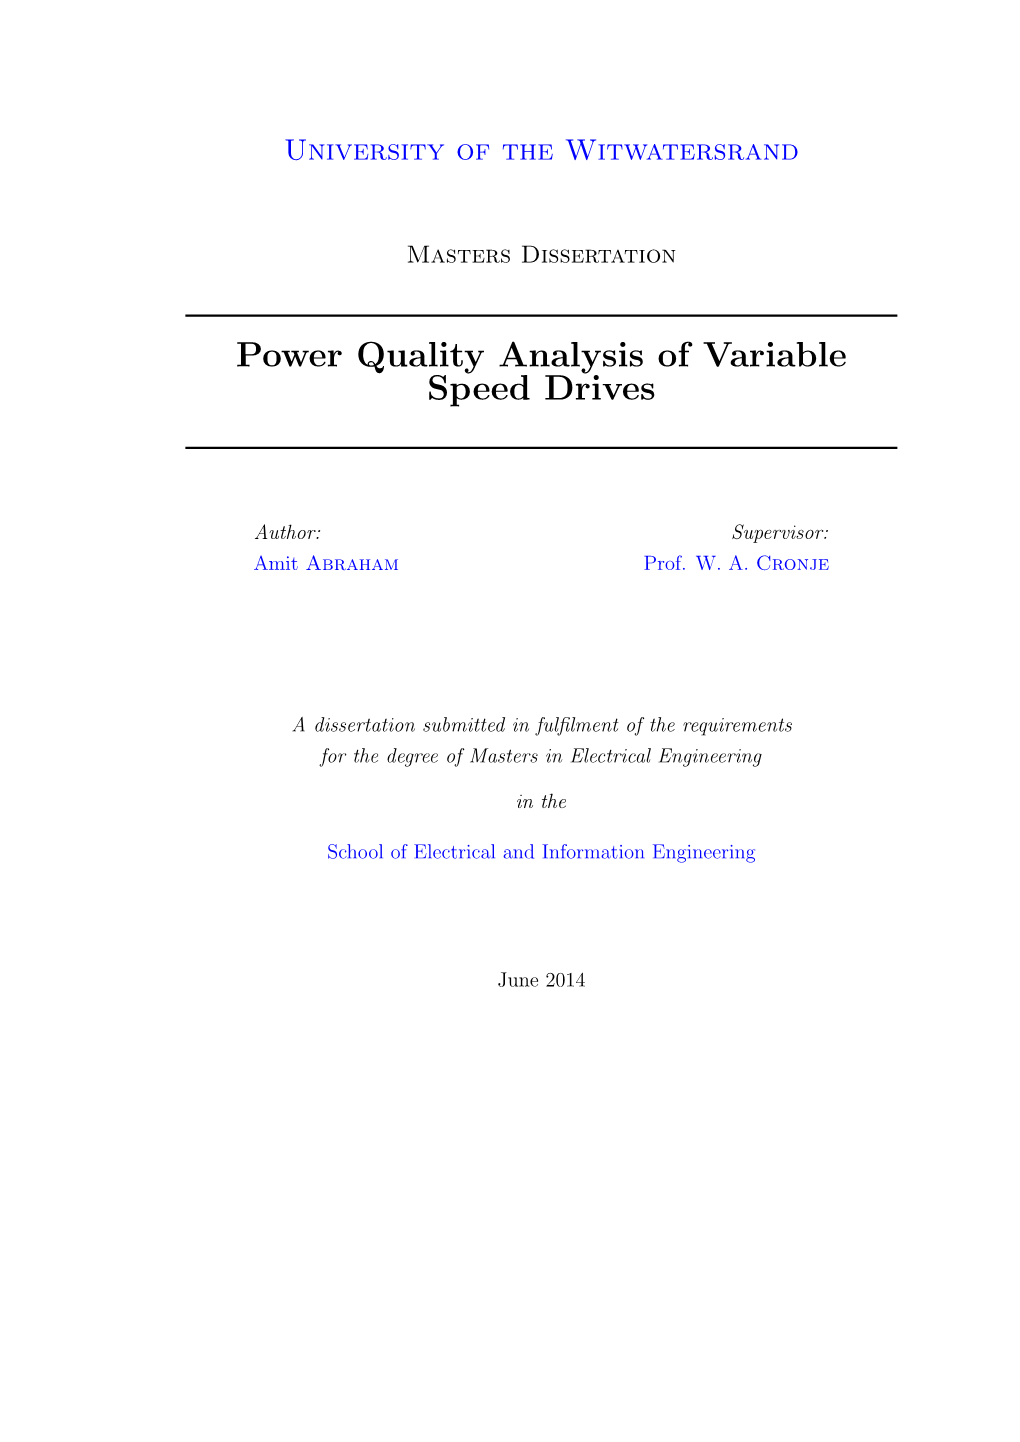 Power Quality Analysis of Variable Speed Drives